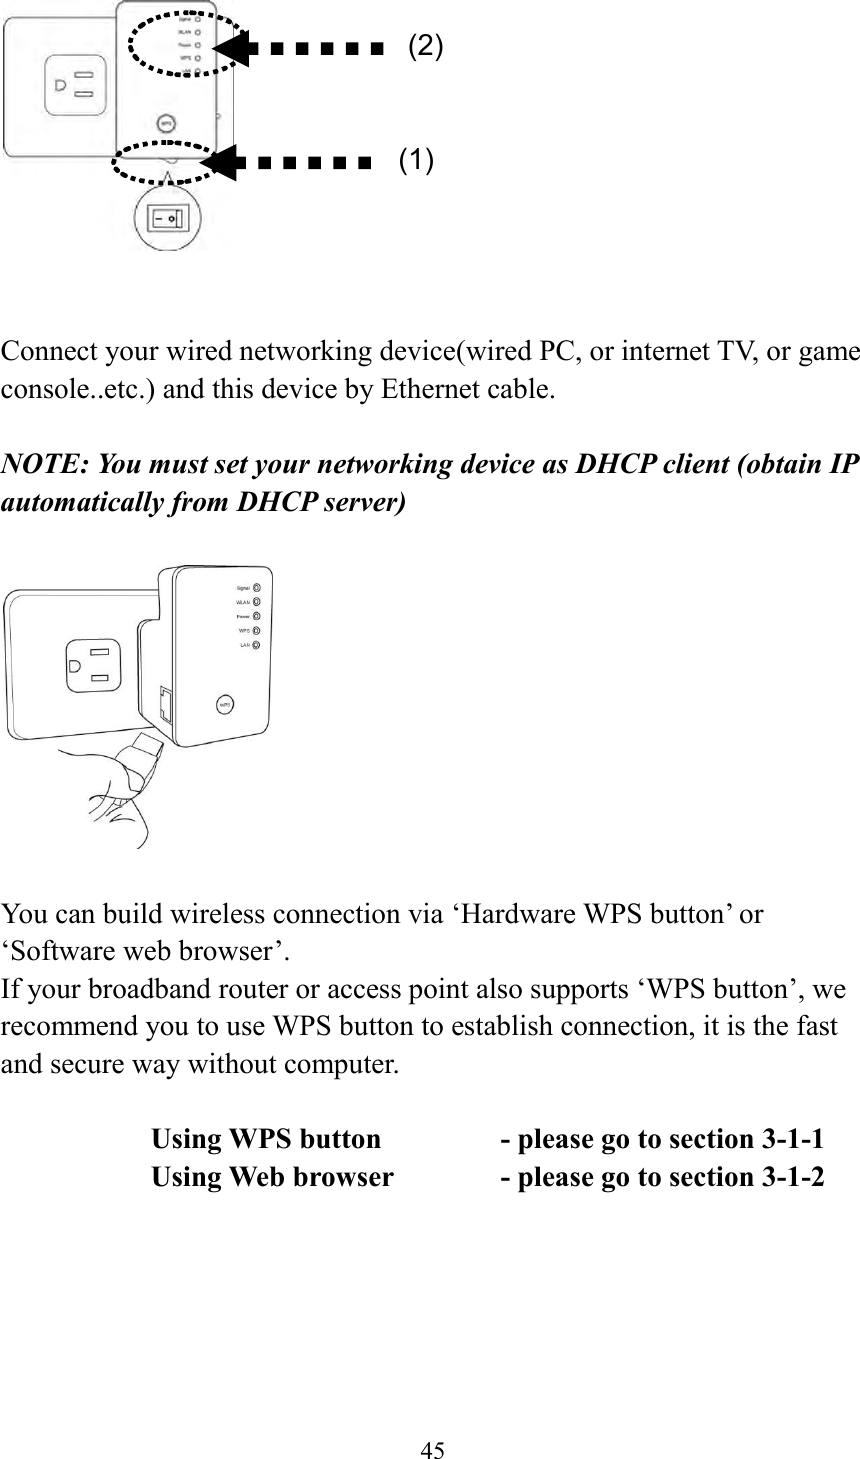  45     Connect your wired networking device(wired PC, or internet TV, or game console..etc.) and this device by Ethernet cable.  NOTE: You must set your networking device as DHCP client (obtain IP automatically from DHCP server)    You can build wireless connection via ‘Hardware WPS button’ or ‘Software web browser’. If your broadband router or access point also supports ‘WPS button’, we recommend you to use WPS button to establish connection, it is the fast and secure way without computer.    Using WPS button      - please go to section 3-1-1       Using Web browser     - please go to section 3-1-2     (2) (1) 